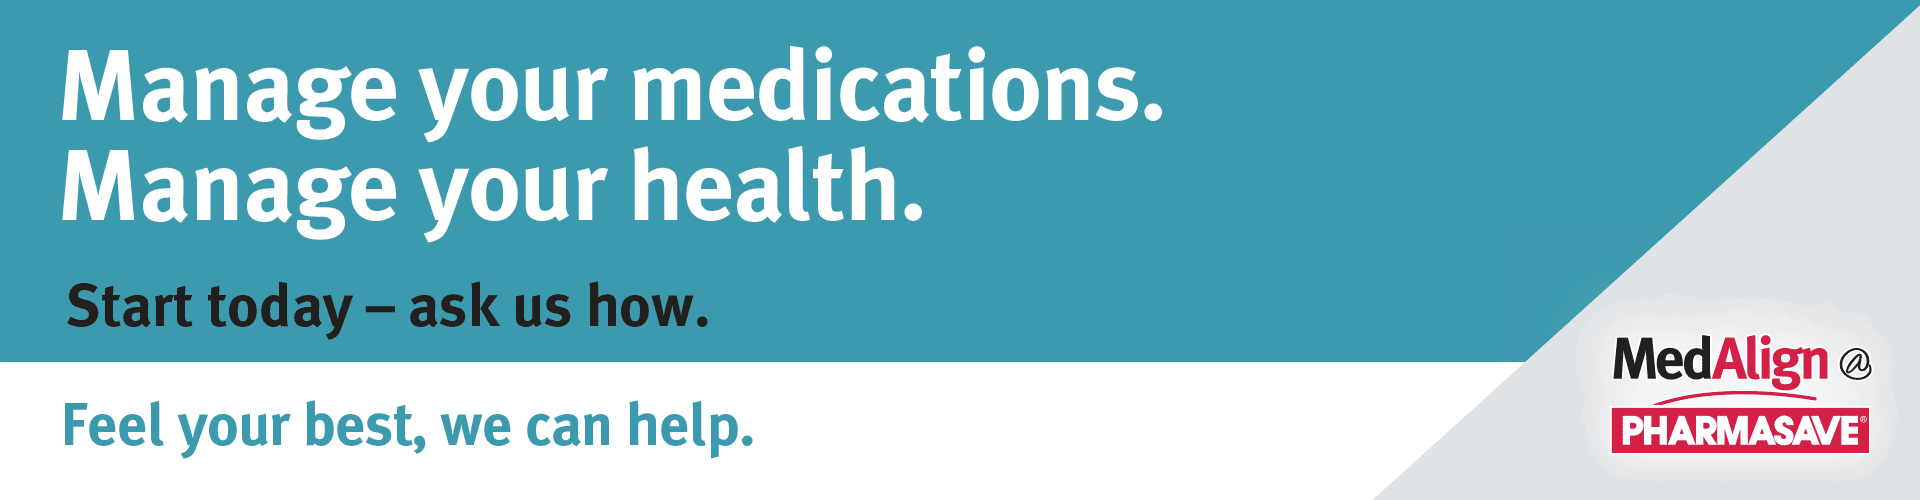 Manage your medications, manage your heath with Pharmasave's MedAlign program.